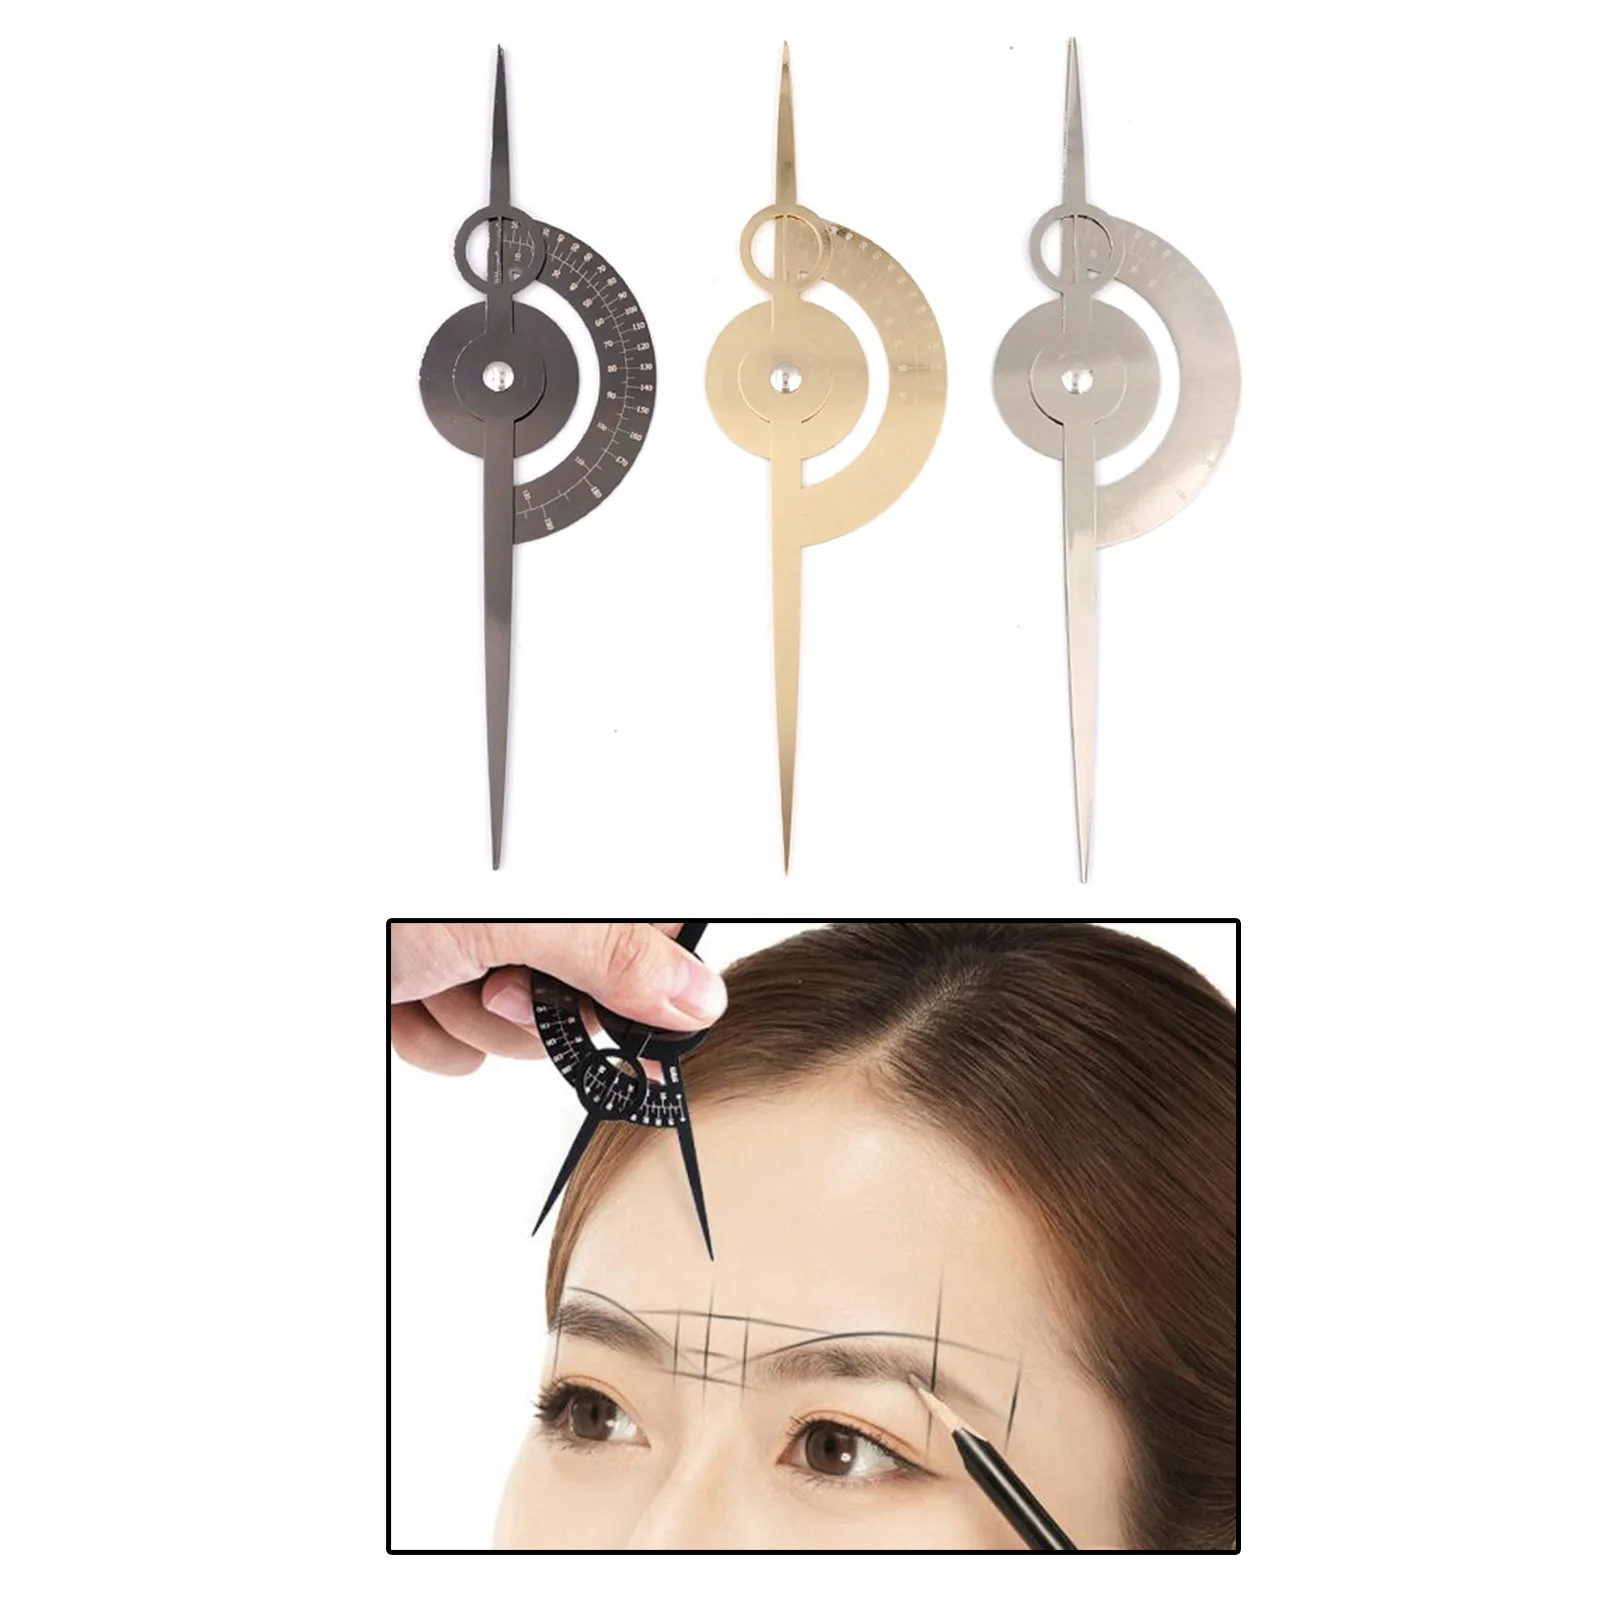 Accurate Ratio Calipers Microblading Eyebrow Ruler Flexible Removable Reusable Stainless Steel Ruler Measure Tools for Makeup